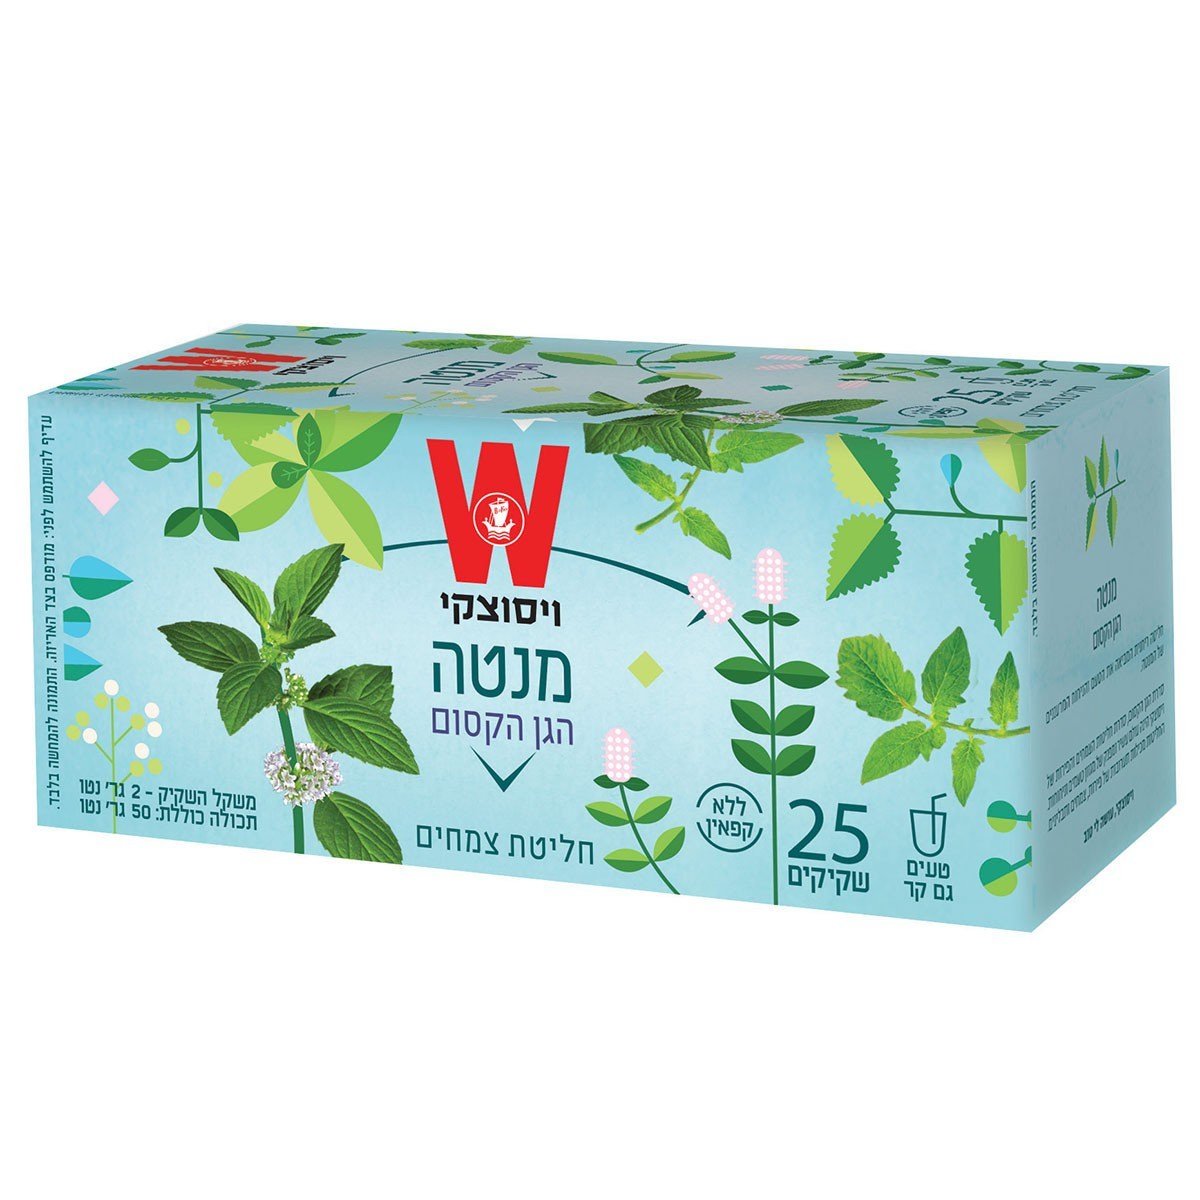 Peppermint Tea From Wissotzky - 1